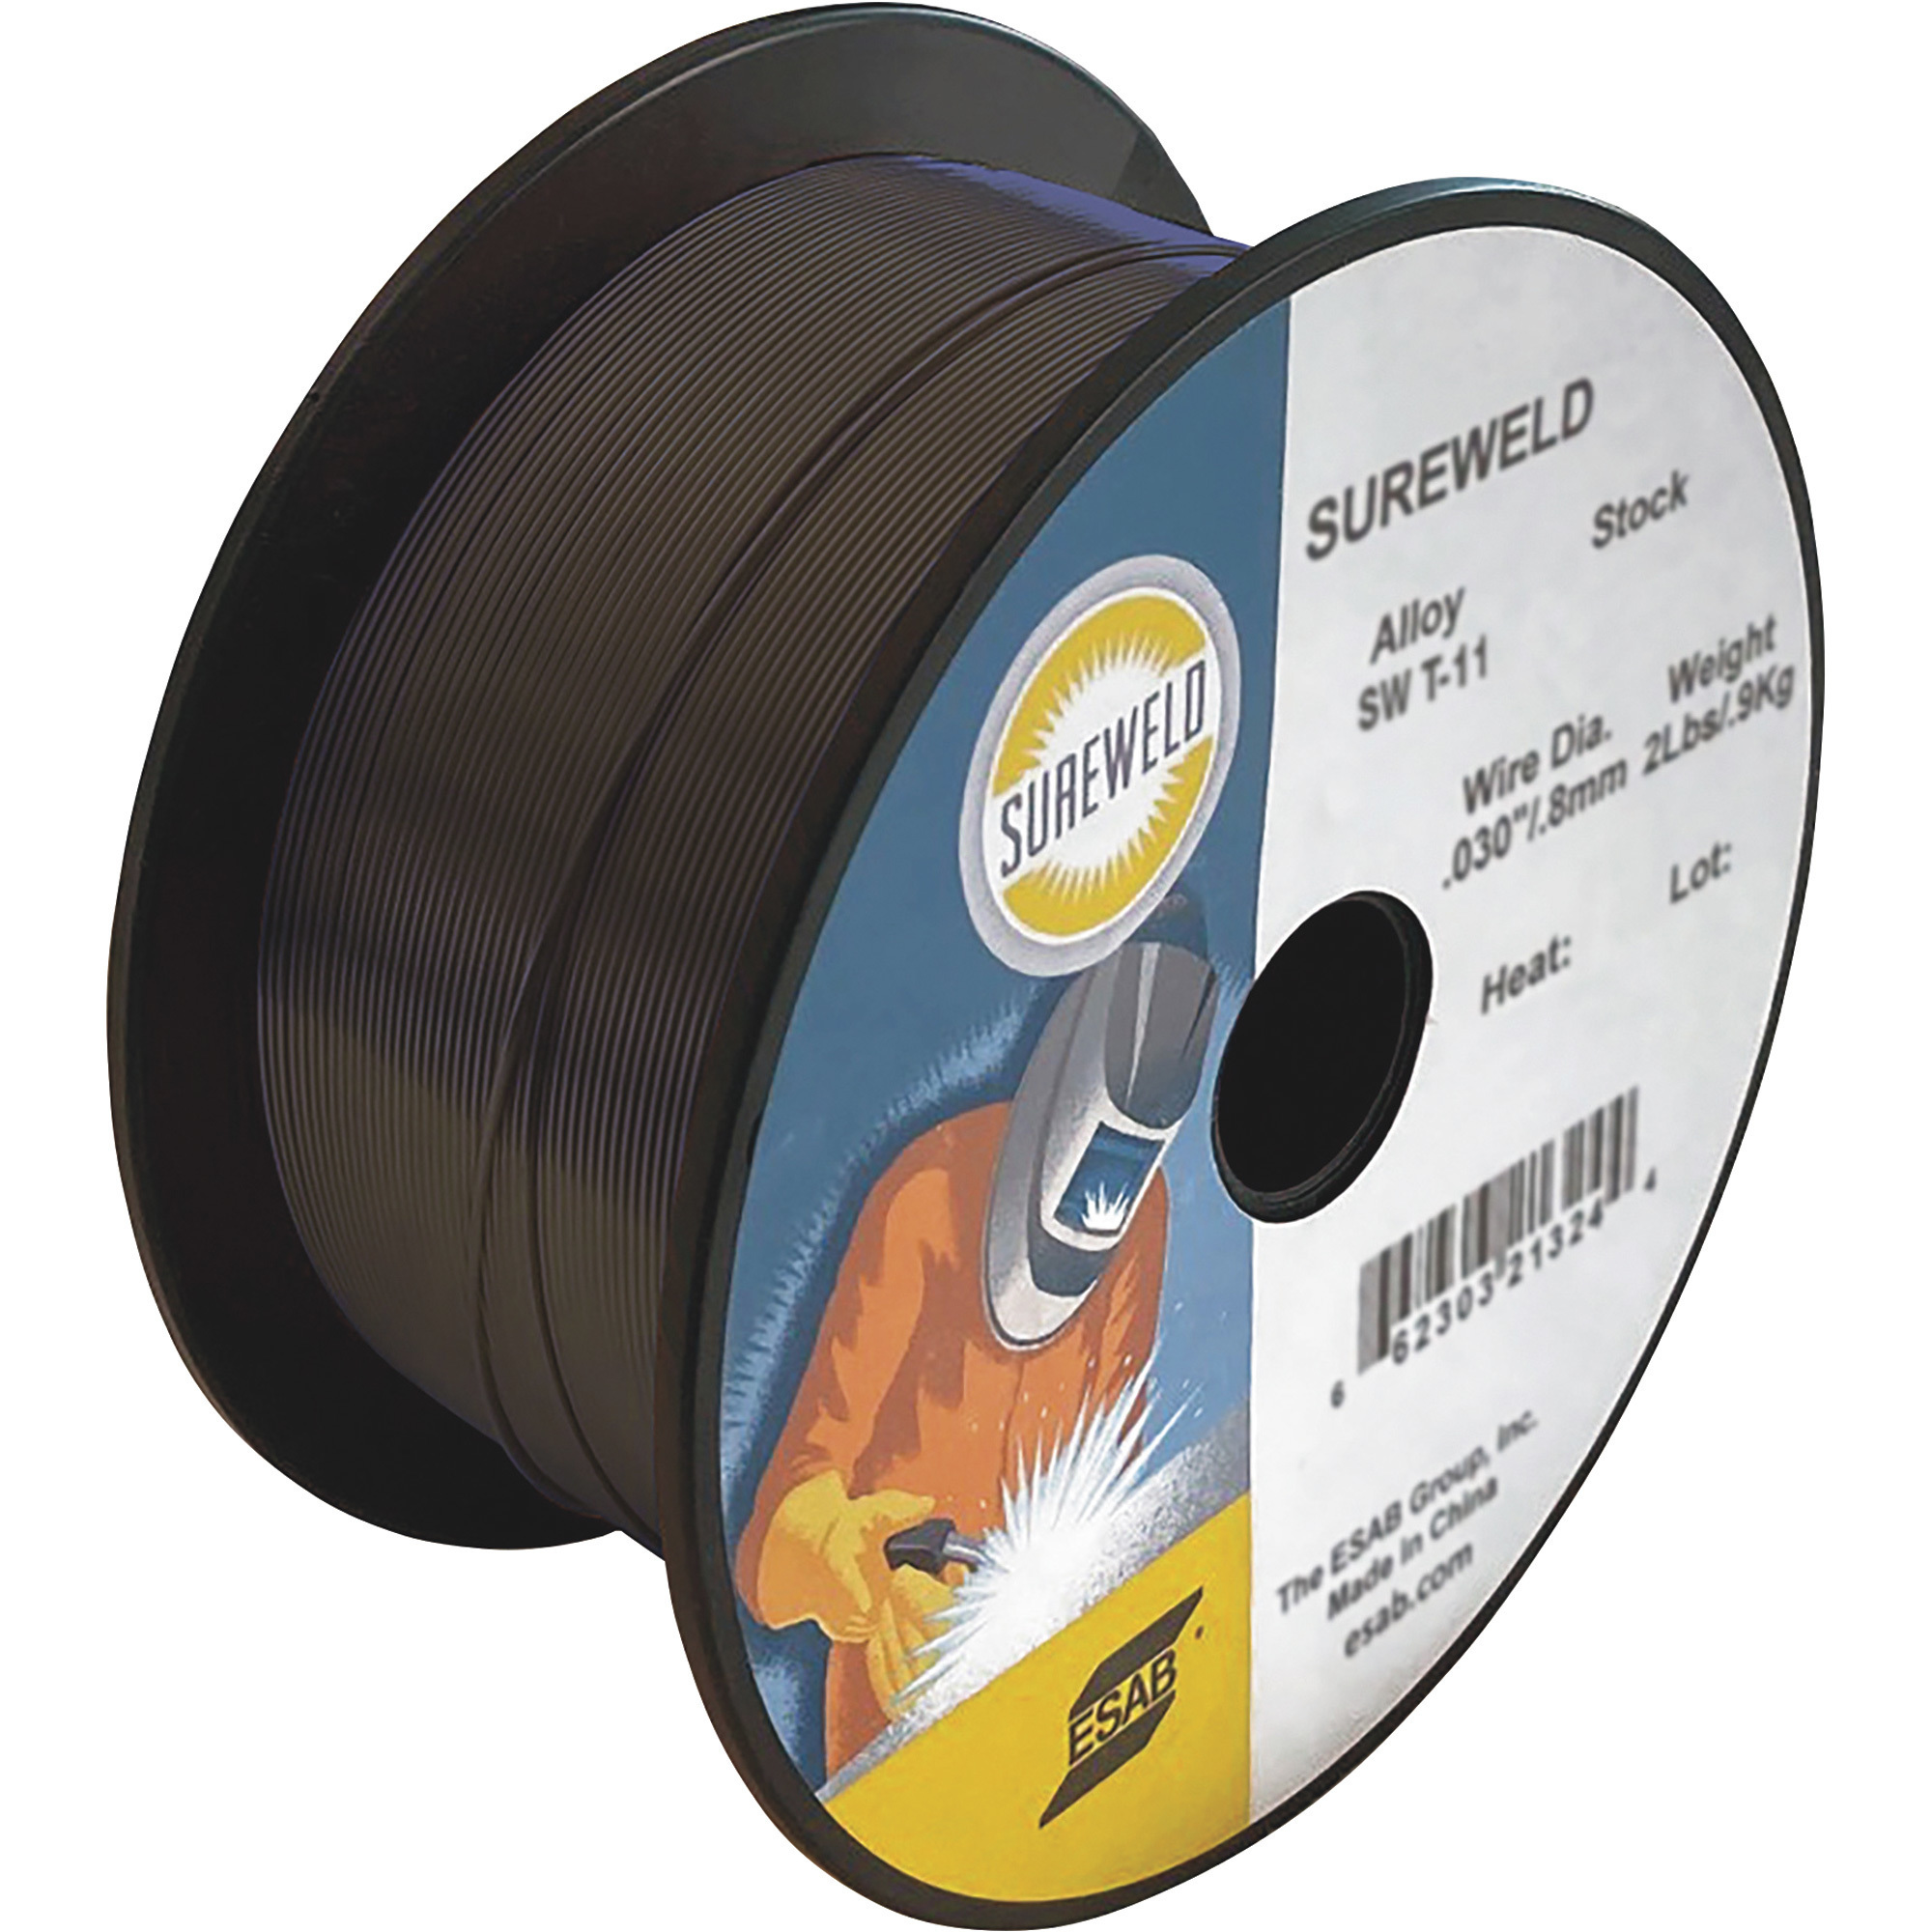 Sureweld T-11 All-Position Flux-Cored Welding Wire — 2-Lb. Spool, 0.035Inch, Model - ESAB 242203508